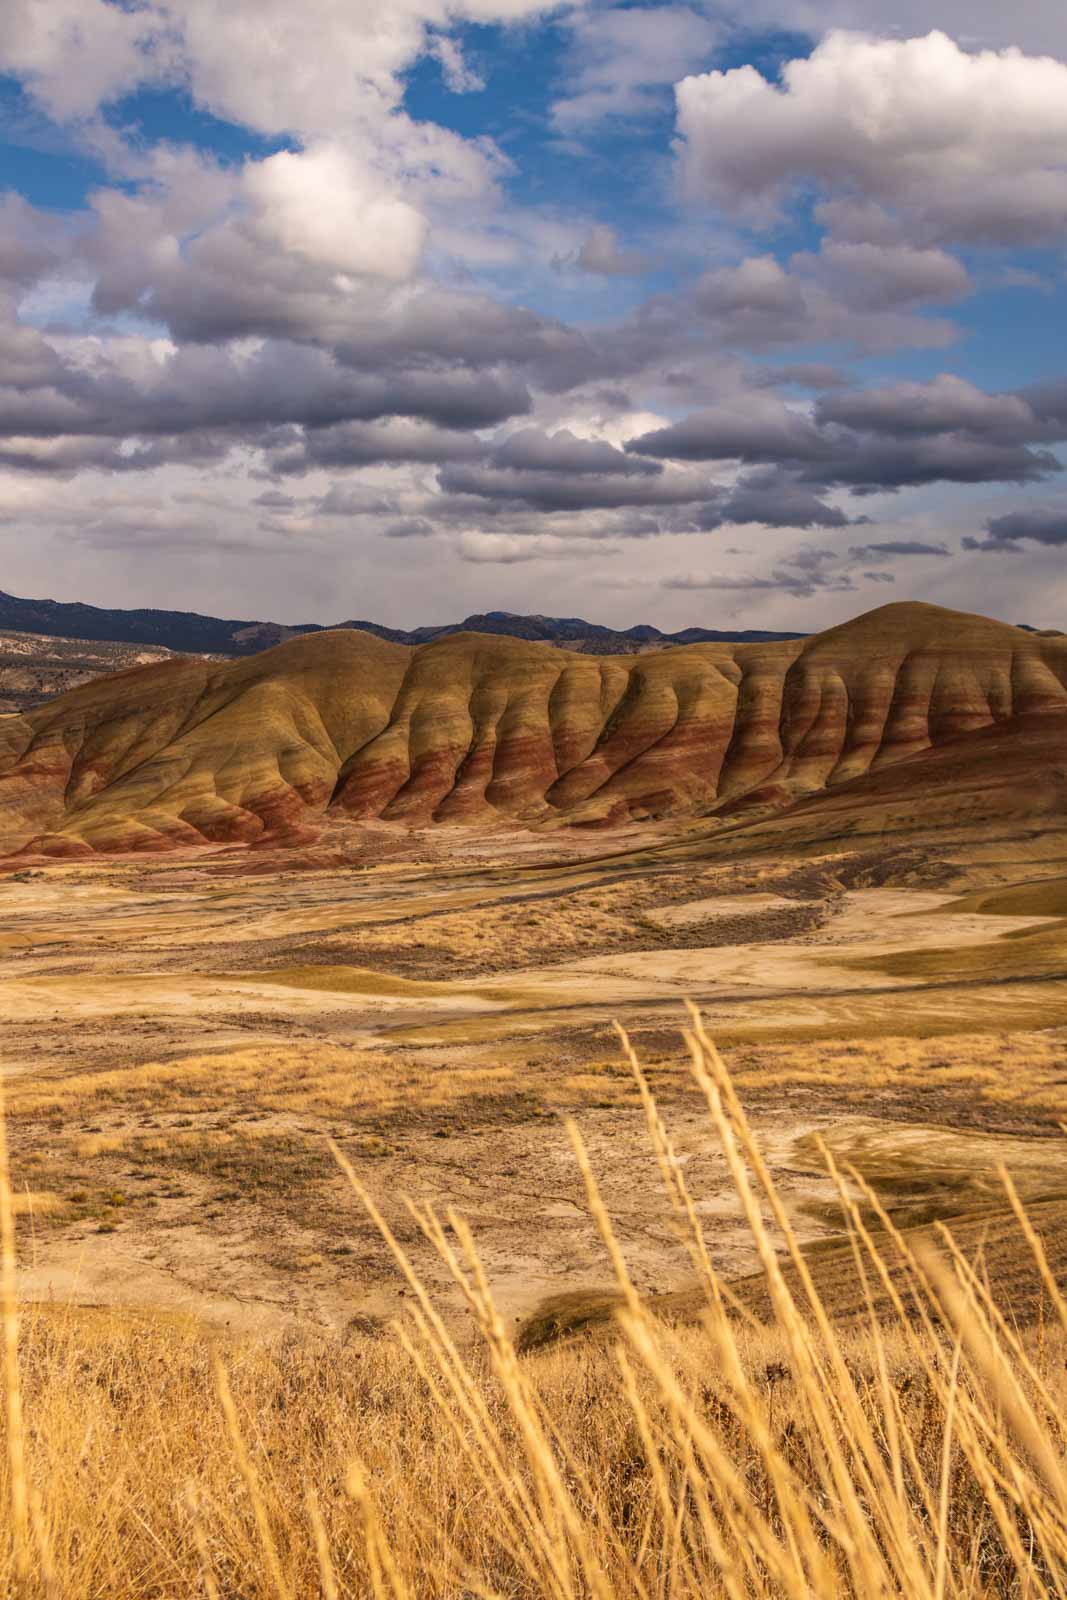 Exciting view of Painted Hills in the John Day Fossil Beds.